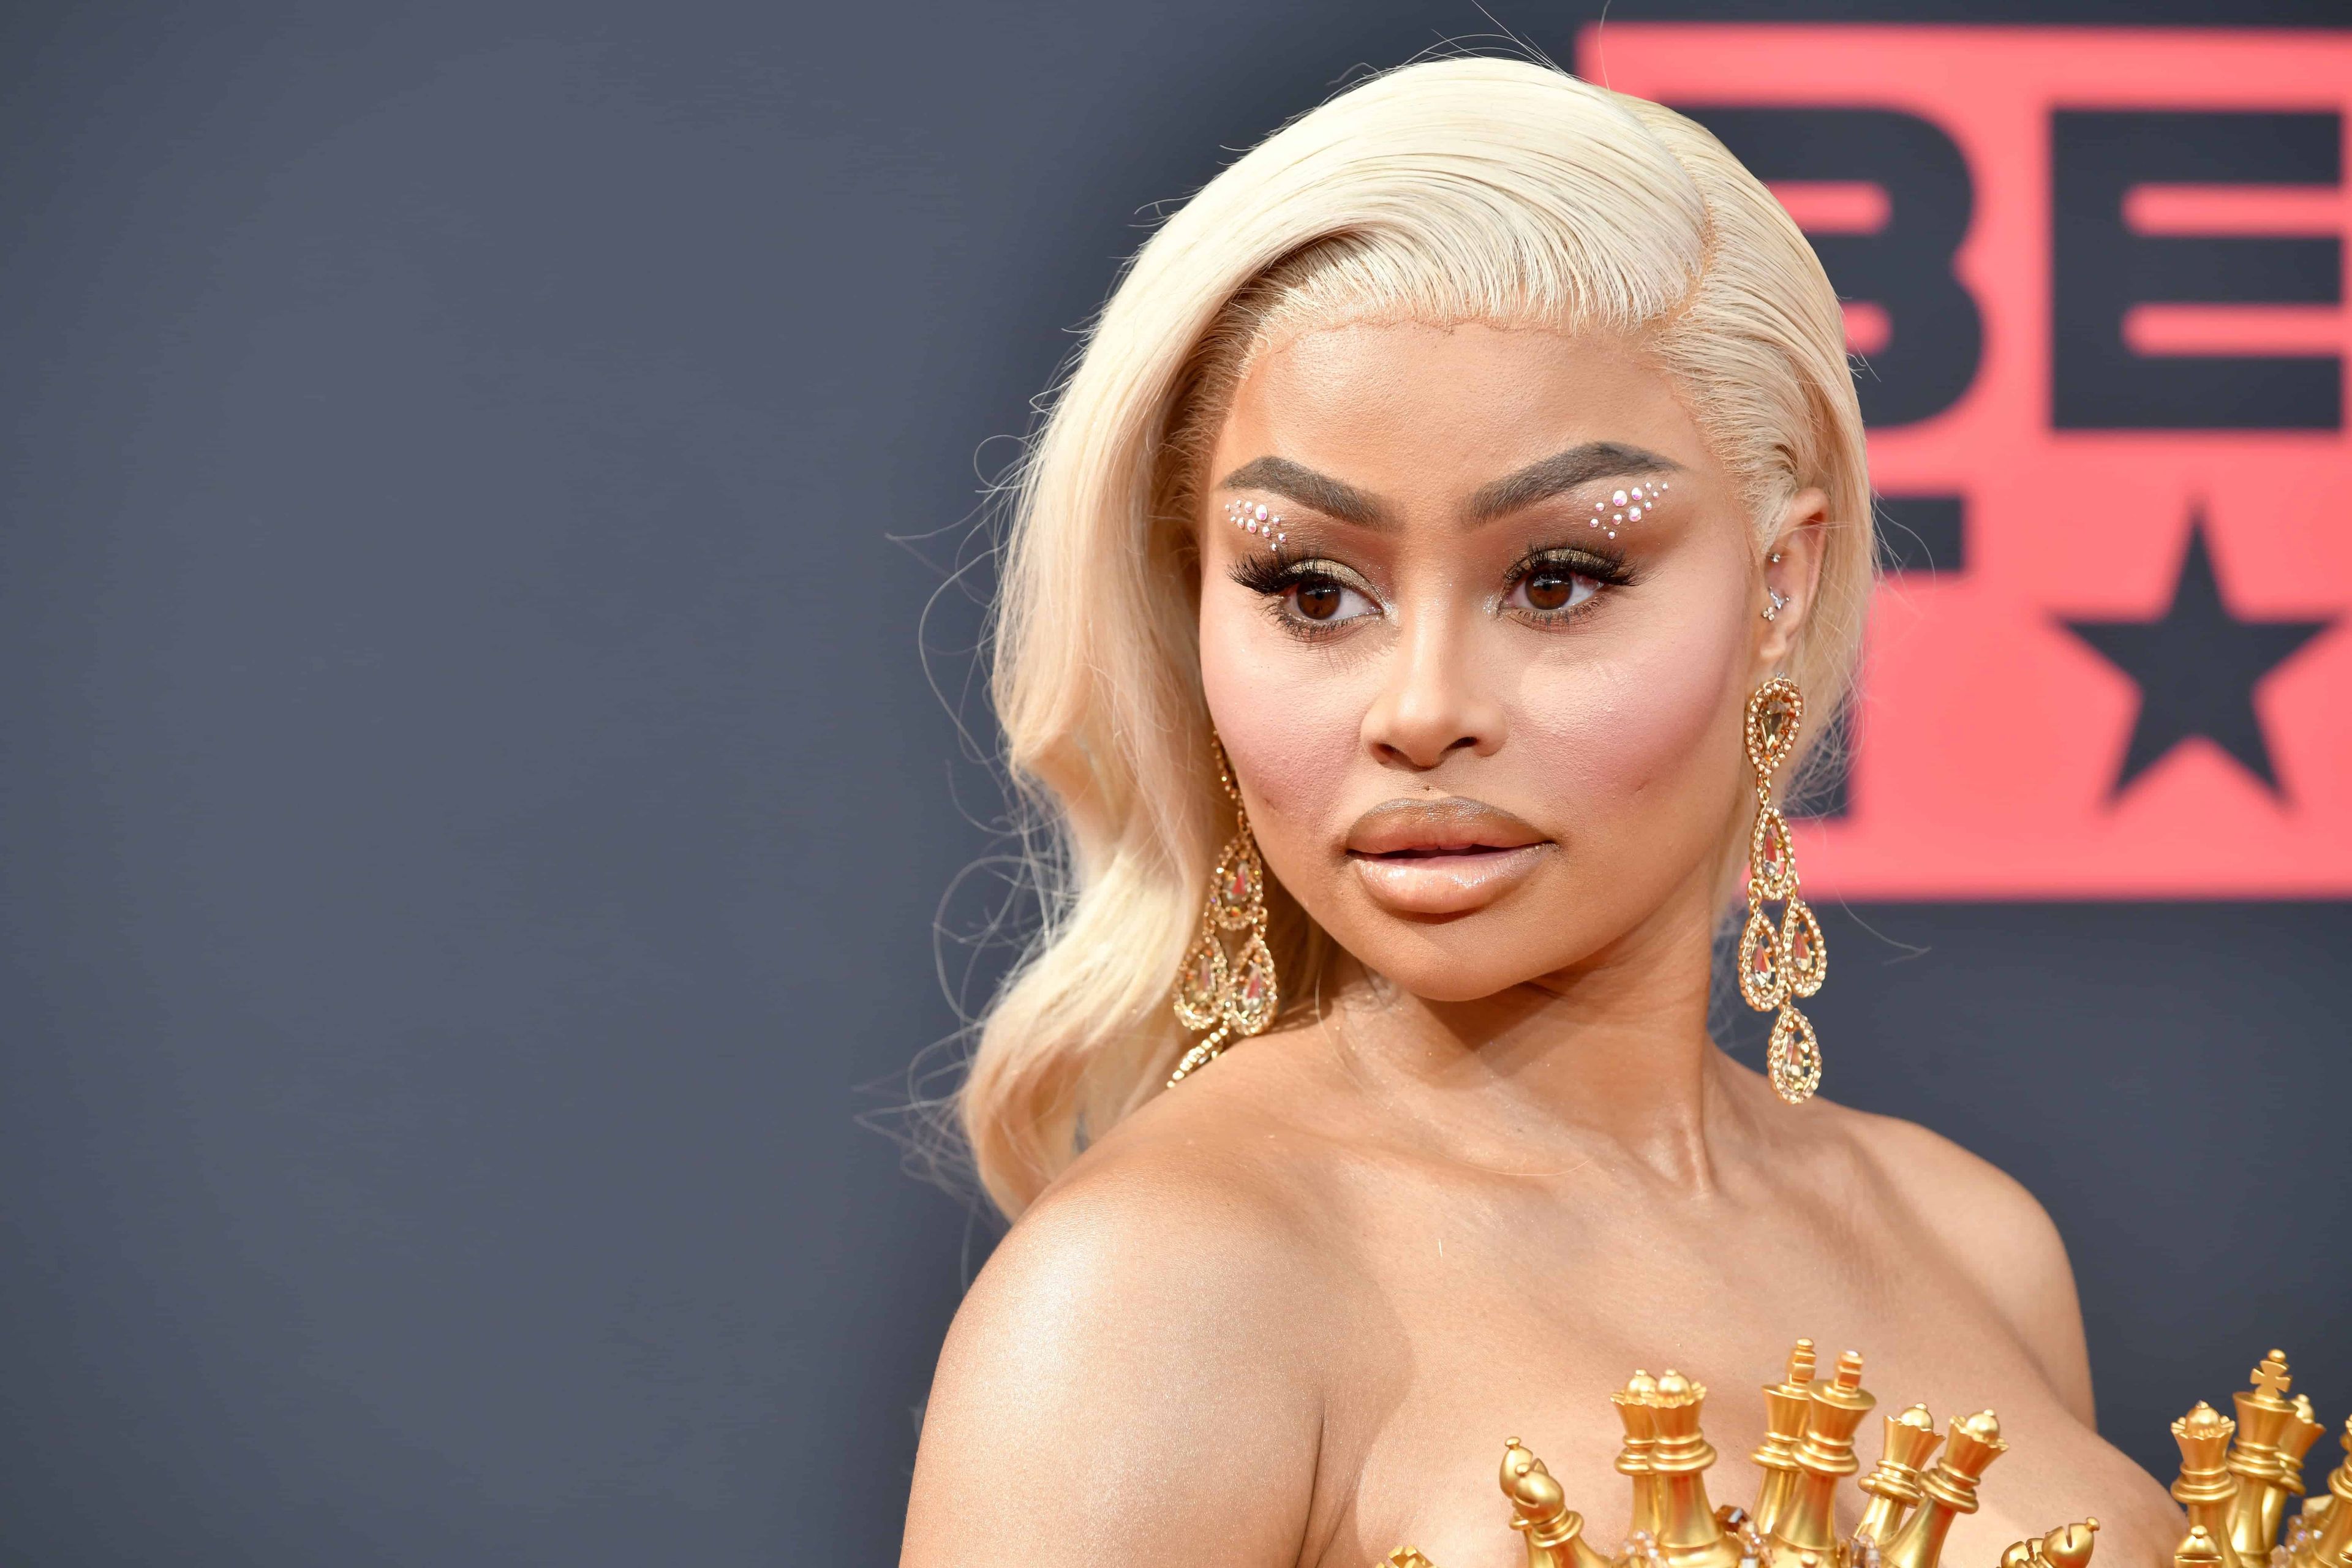 Blac Chyna Completely Switches Up Her Look, Shaves Her Head Bald